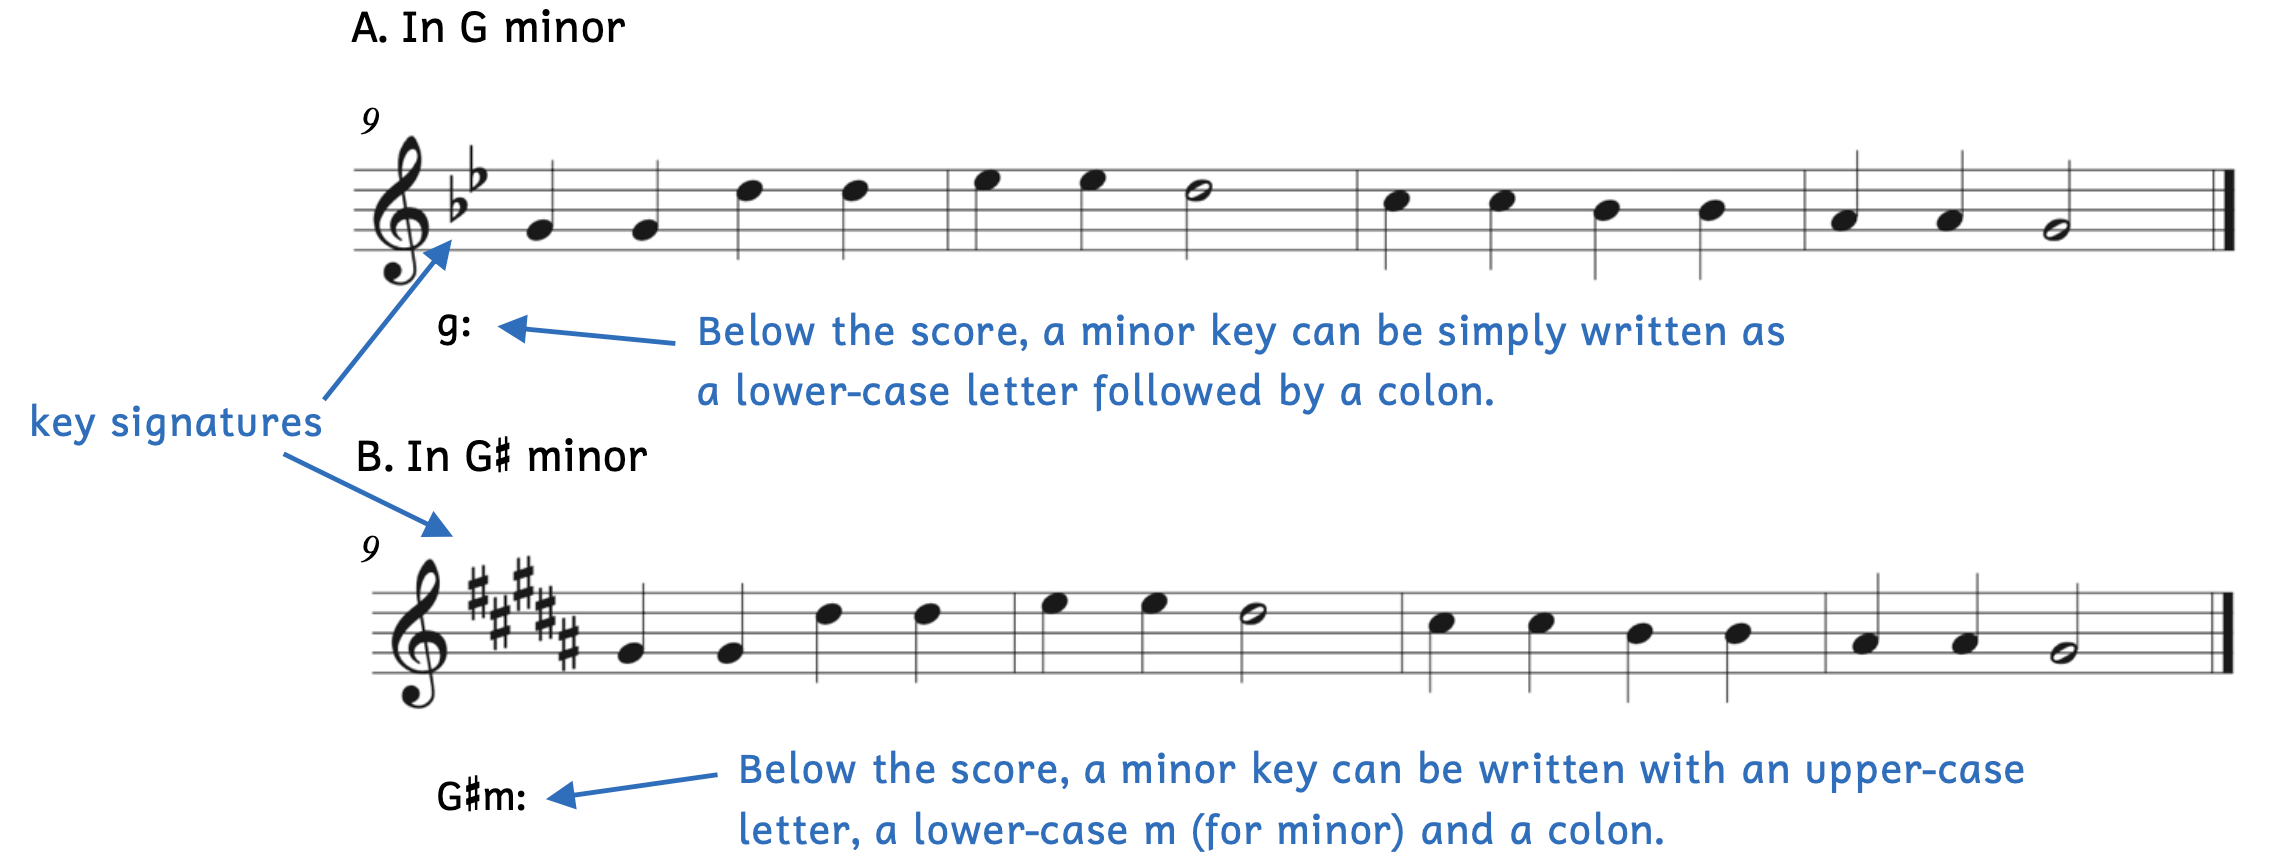 "Dingy Dingy Little Star" with key signatures. Example A is in G minor which has 2 flats. Below the score, a minor key can be simply written as a lower-case letter followed by a colon. Example B is in G-sharp minor which has 5 sharps. Below the score, a minor key can be written with an upper-case letter, a lower-case m for minor and a colon.